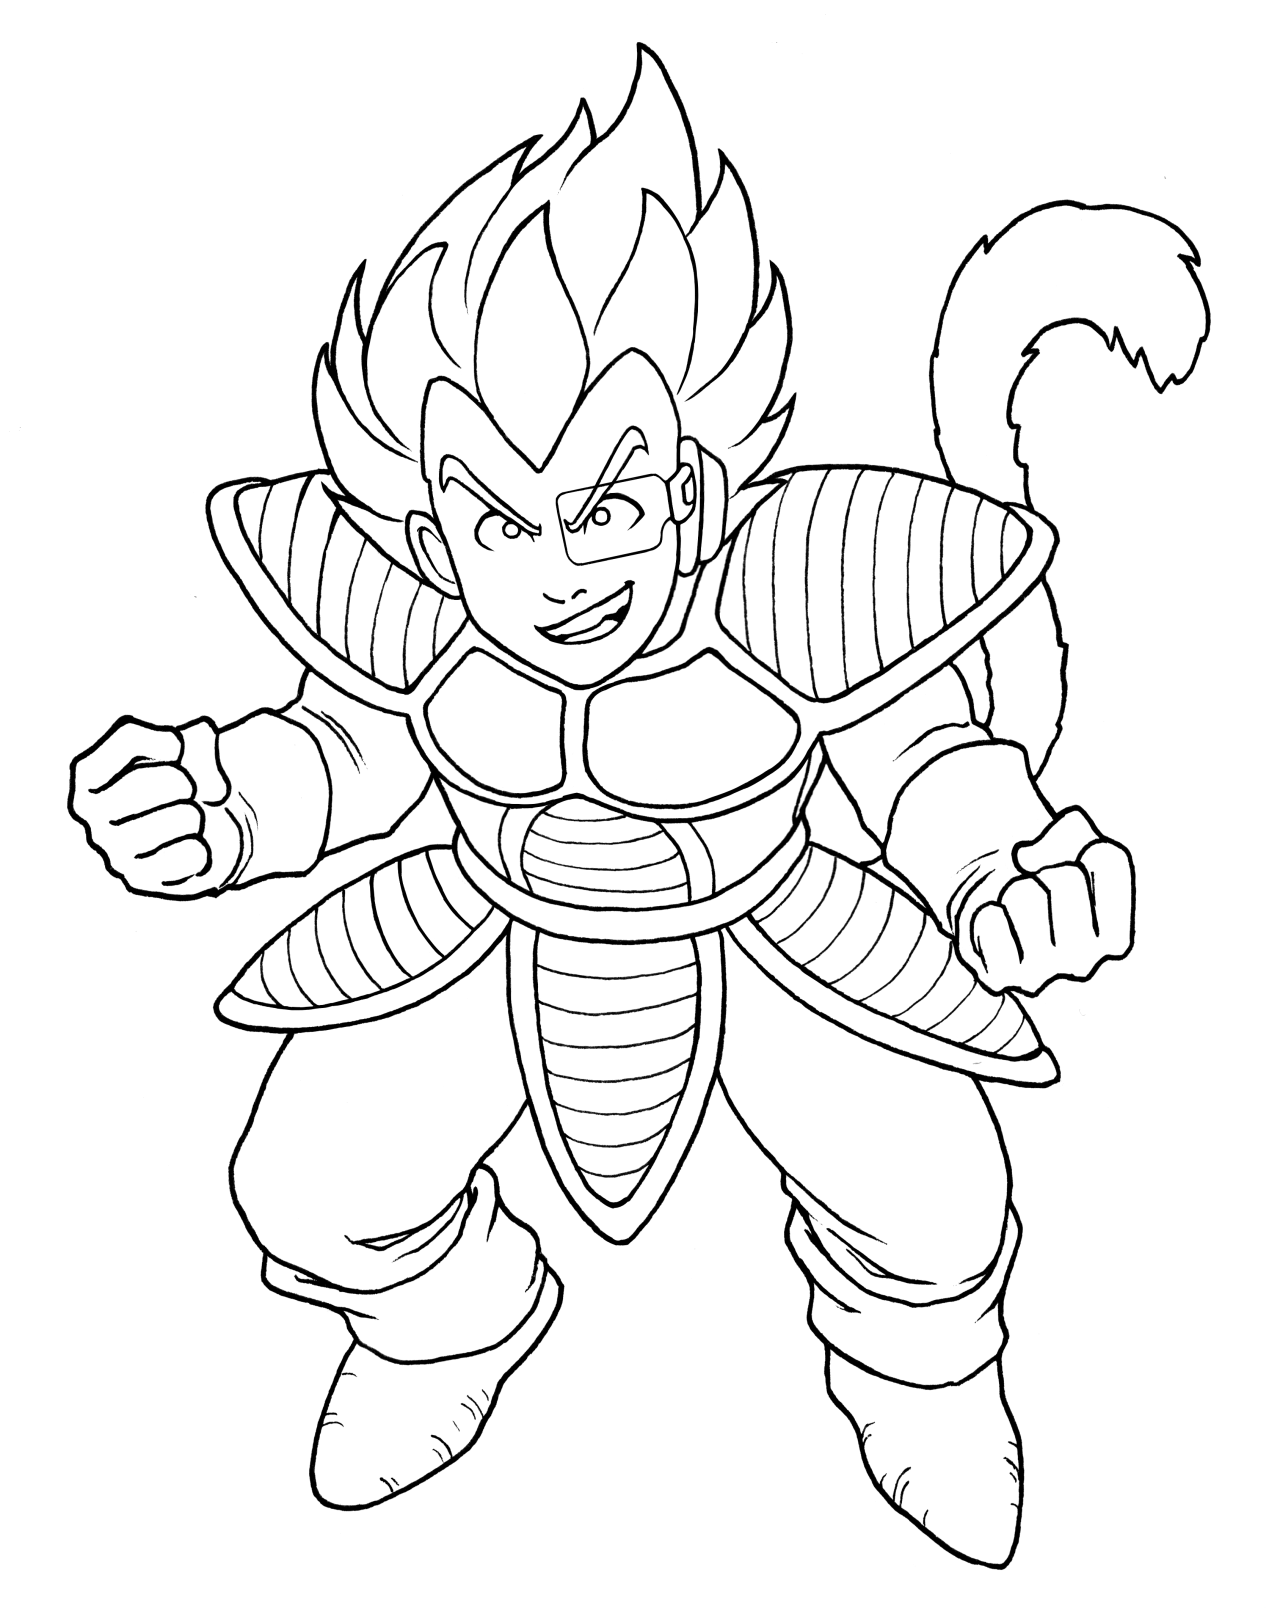 Coloring book â lineart by me more gremlin vegeta because hes